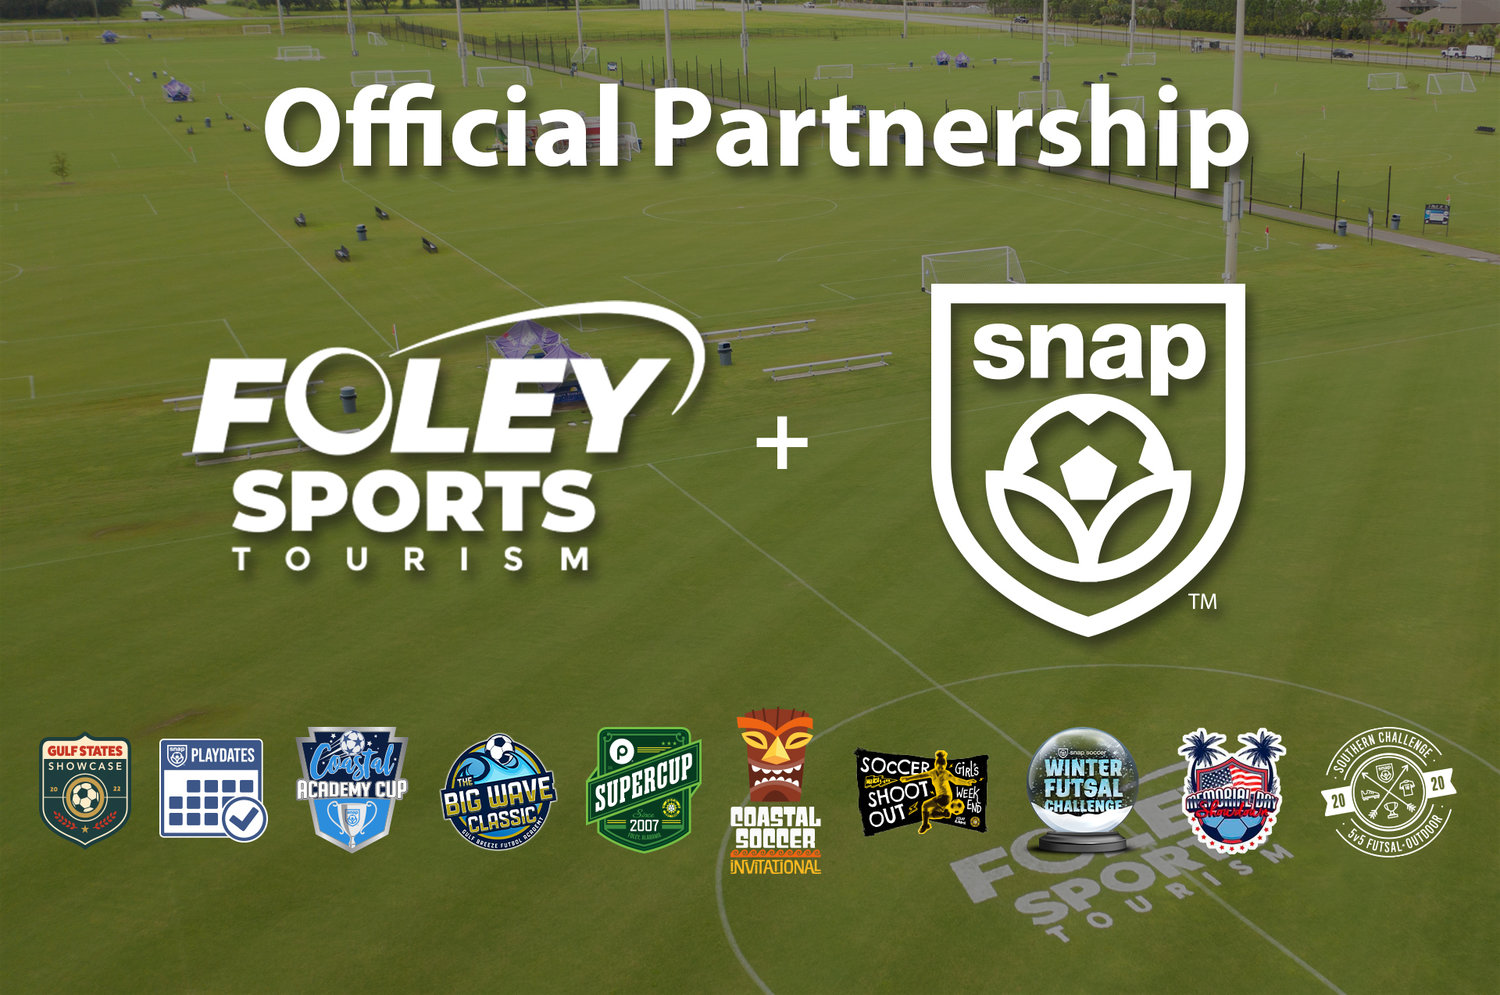 Snap Soccer and Foley Sports Tourism agreed to a long-term deal that will keep the city of Foley as a destination for elite youth soccer competition for years to come.